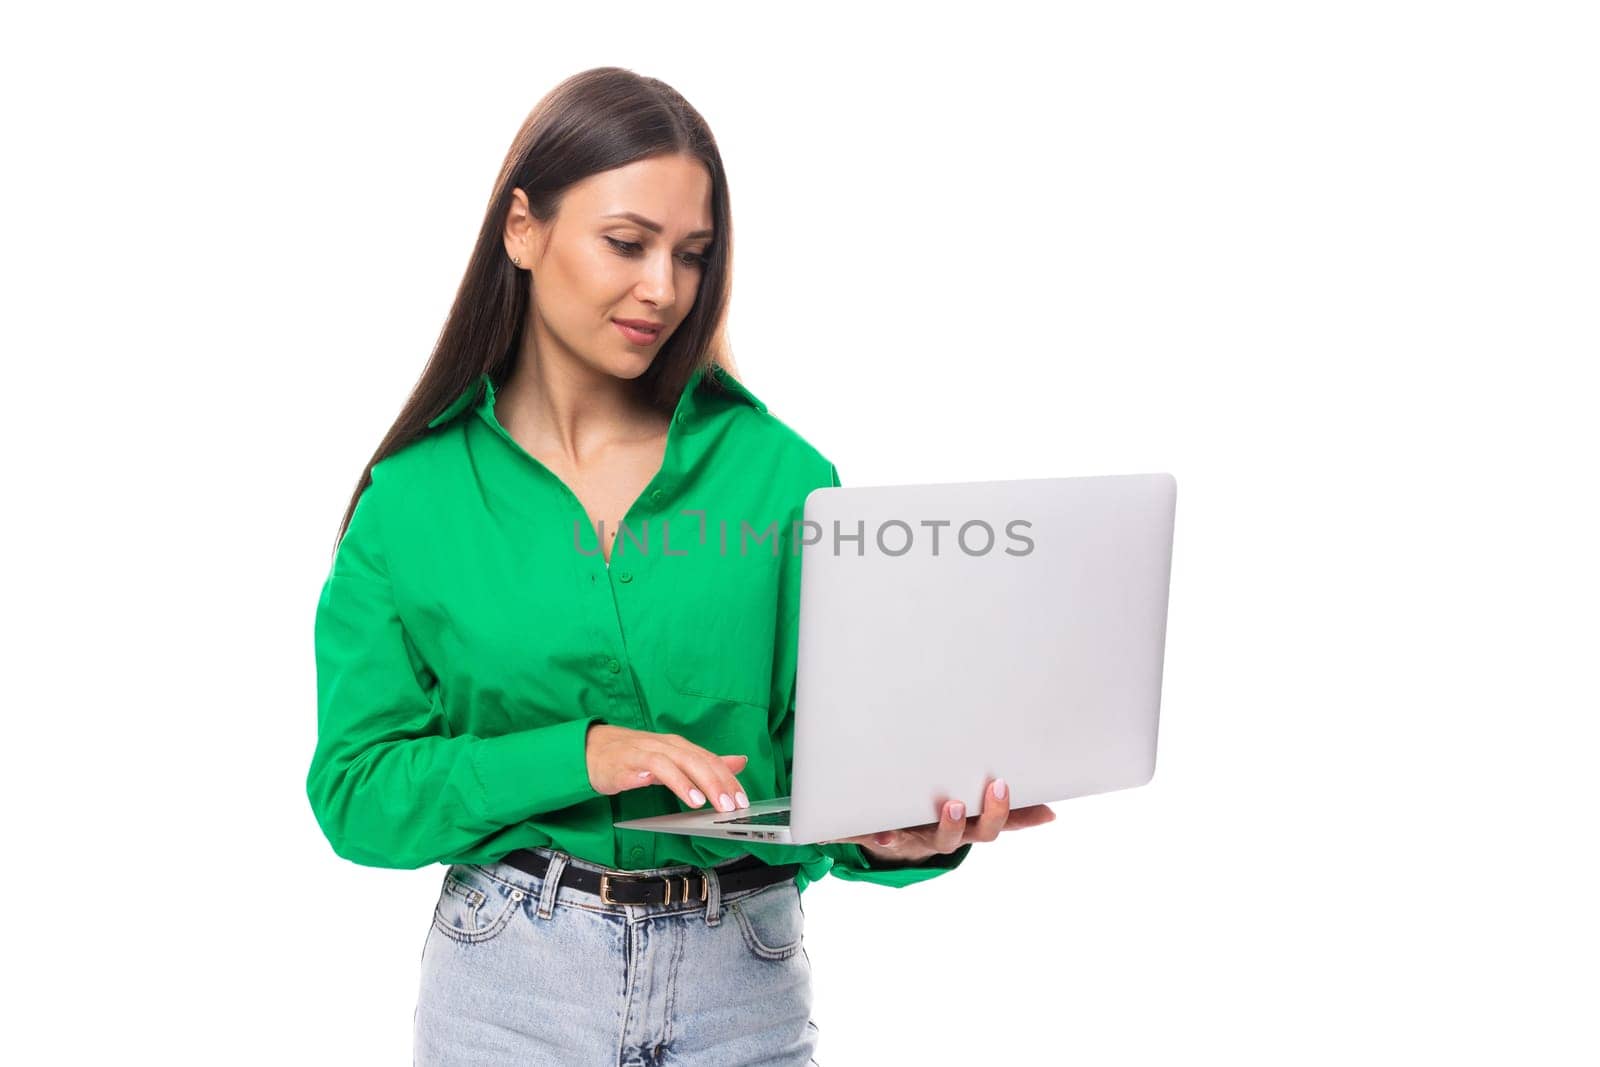 brown-eyed brunette young business lady in a green shirt with a portable computer laptop.